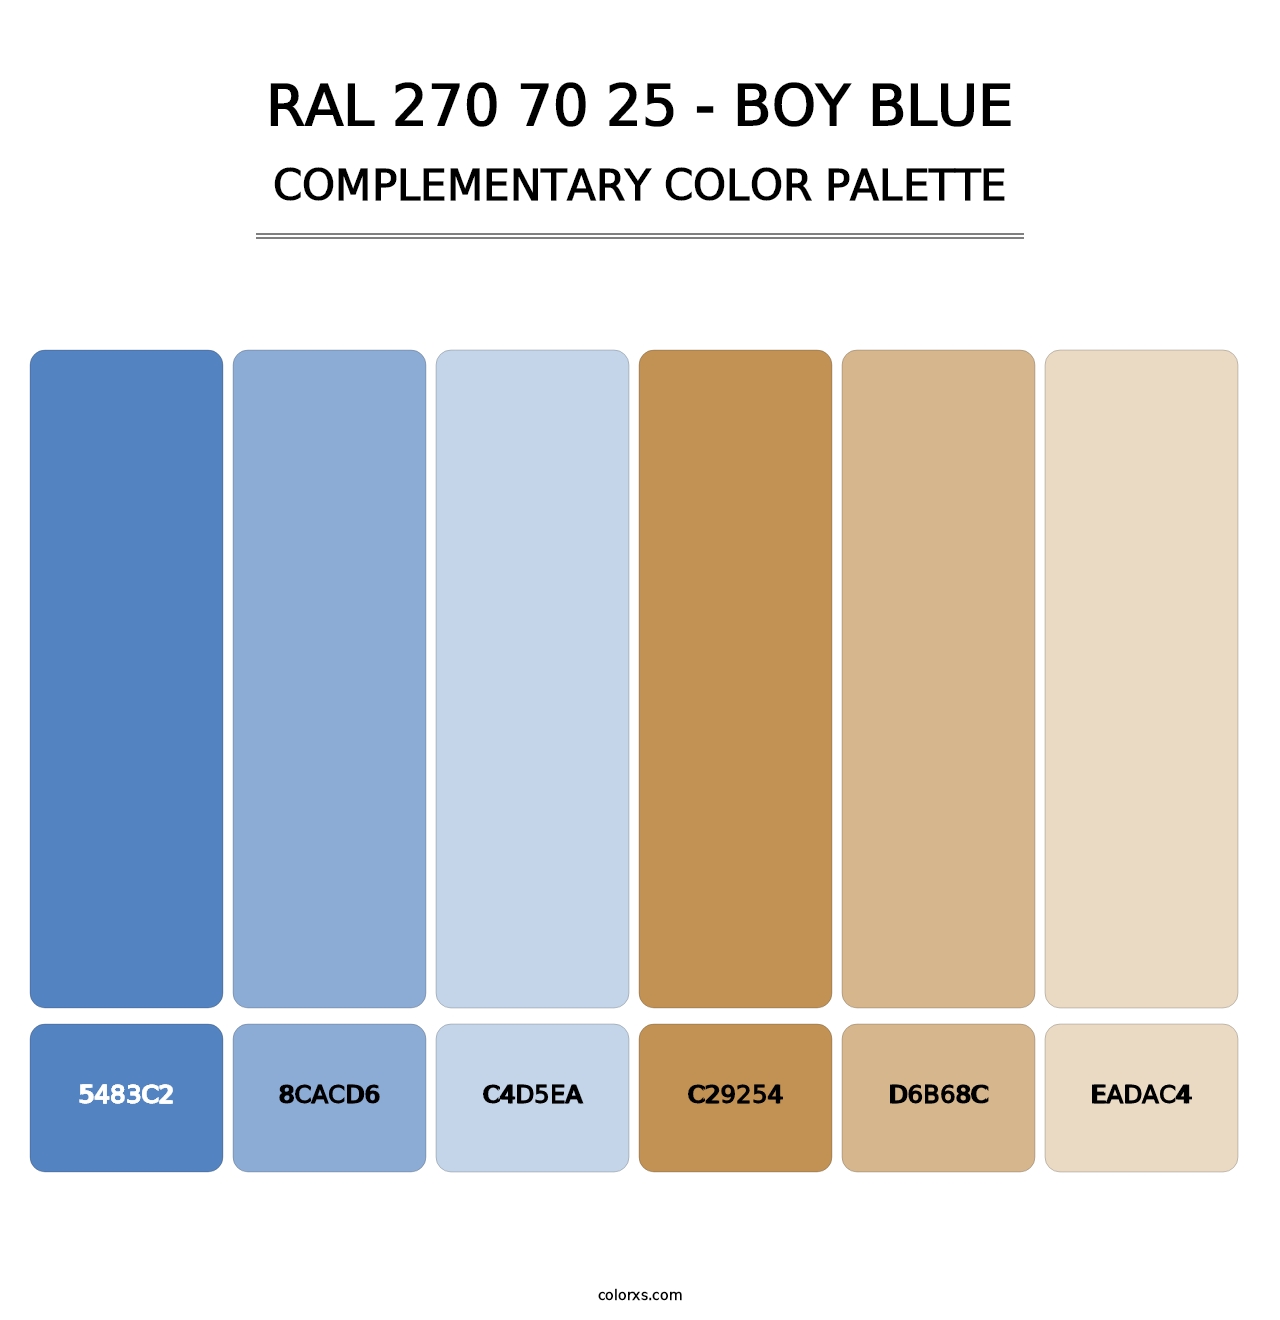 RAL 270 70 25 - Boy Blue - Complementary Color Palette